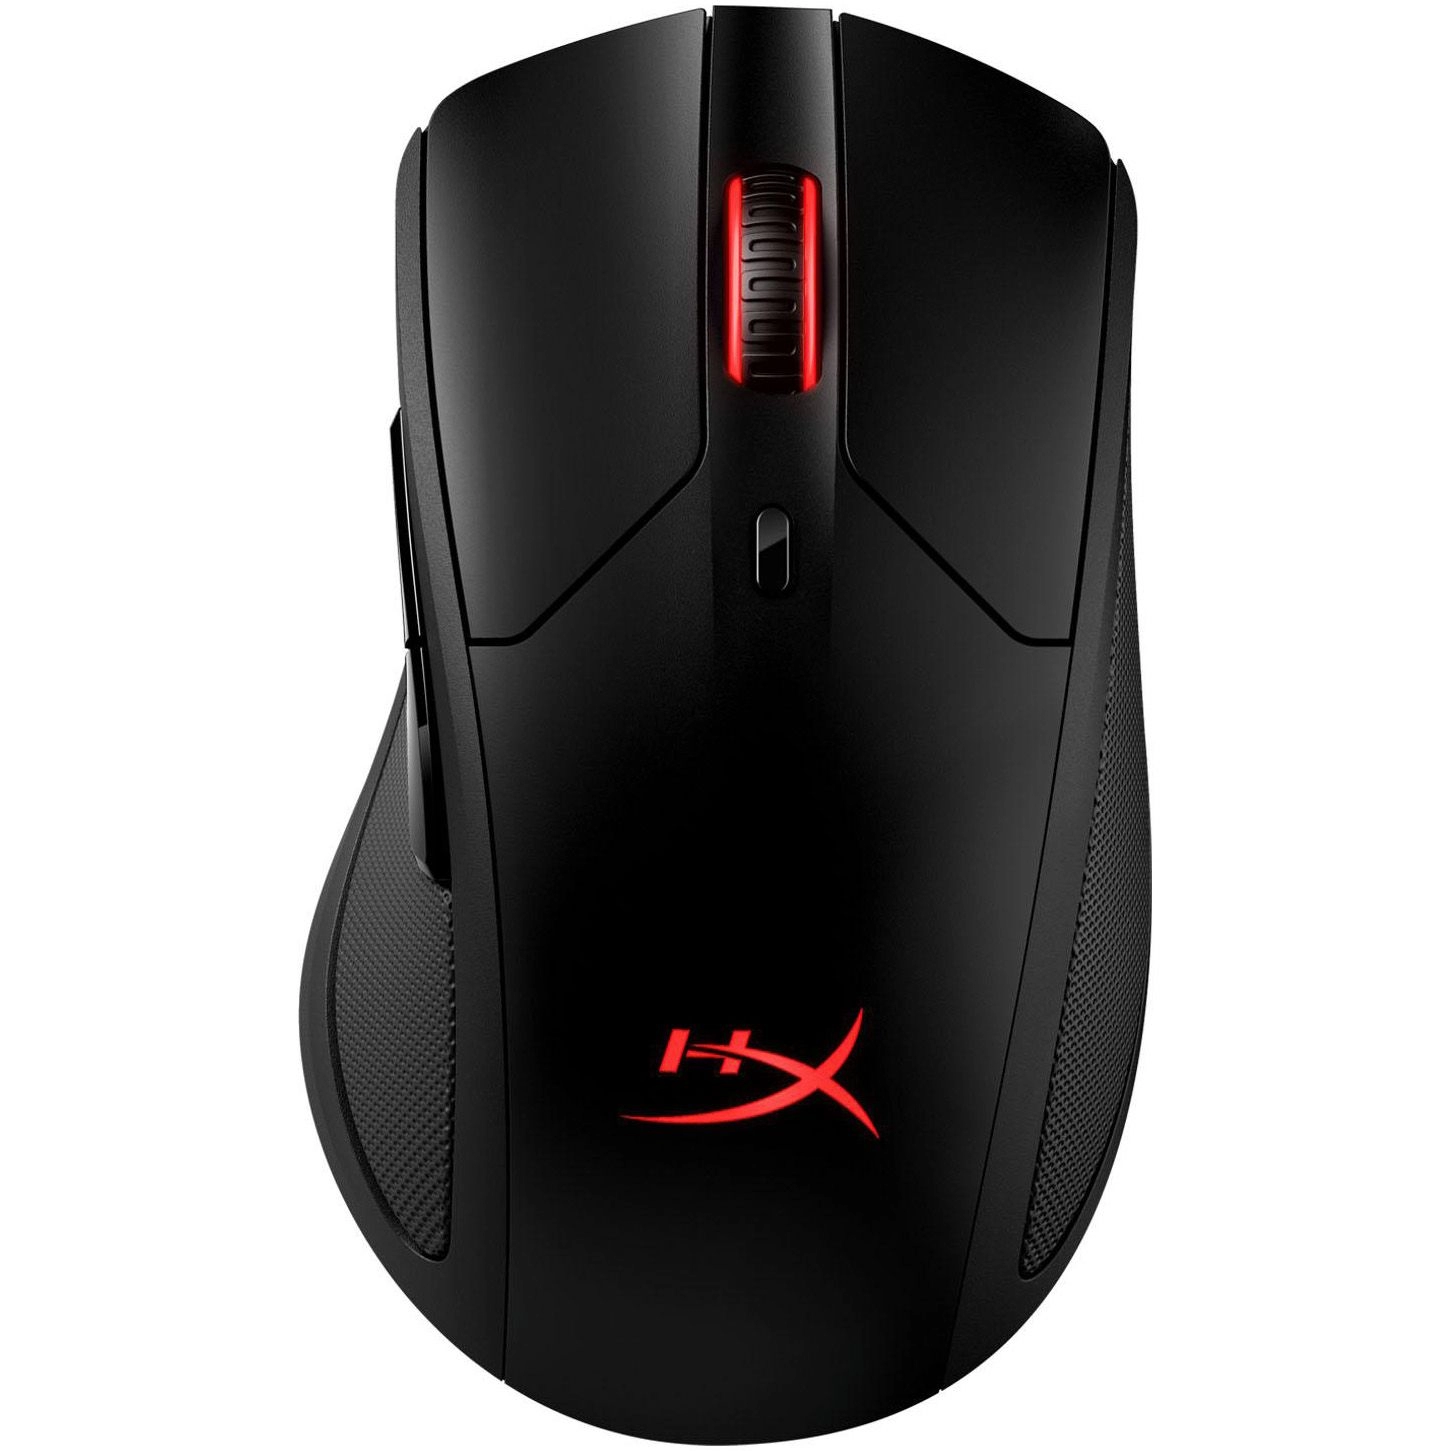 HYPERX Pulsefire Dart Wireless Gaming Mouse, up to 16000 DPI, 4 DPI presets, PMW3389 sensor, RGB Logo, Omron switches, Qi Wireless charging, Easy customisation with HyperX NGenuity software, Detachable charging/data cable, 150g